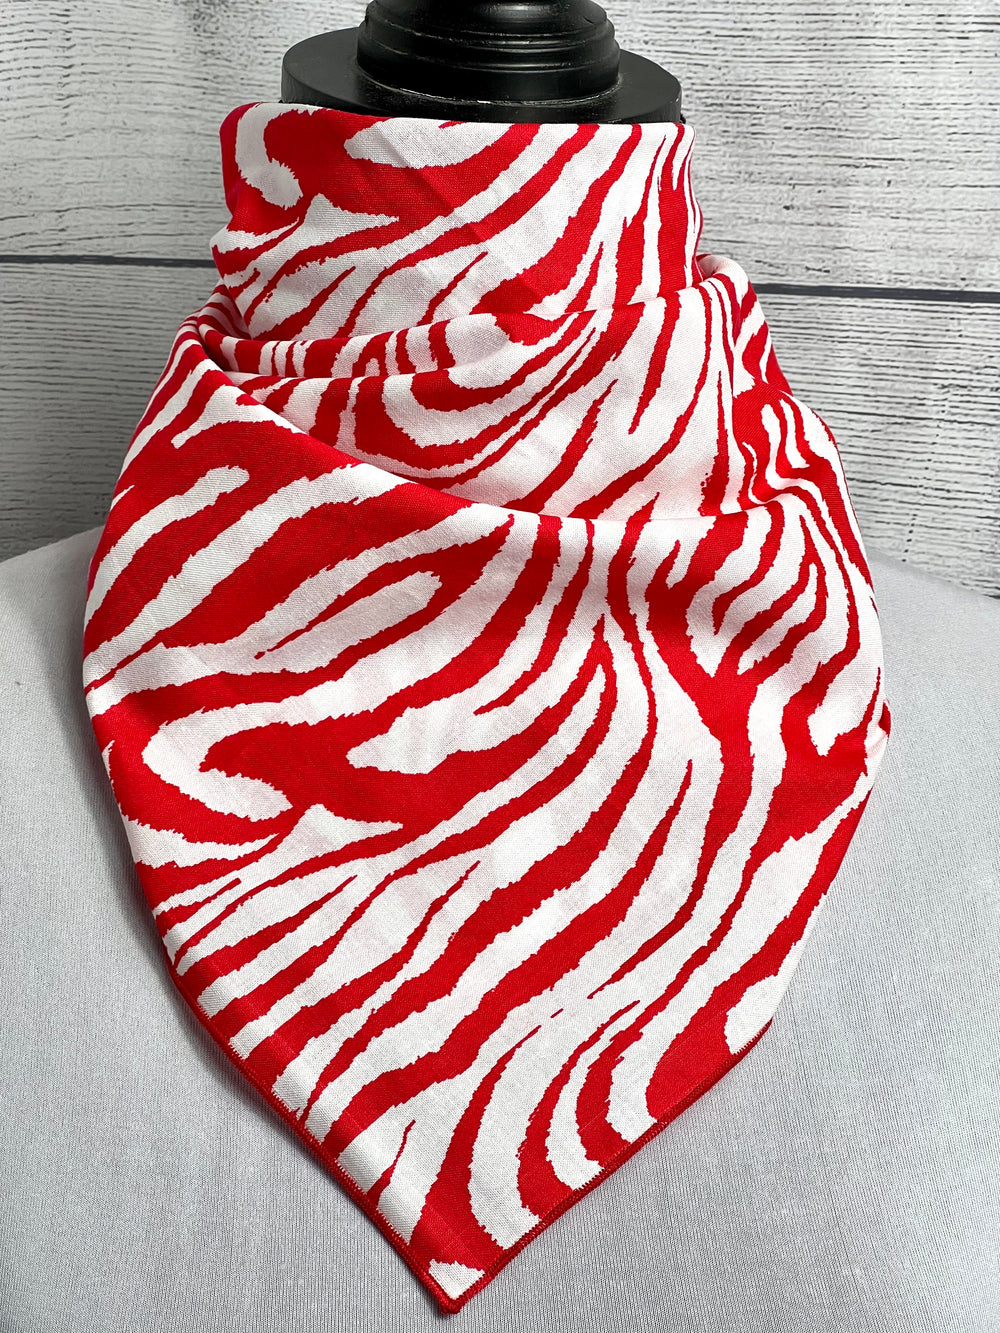 The Red Wooded Cotton Bandana